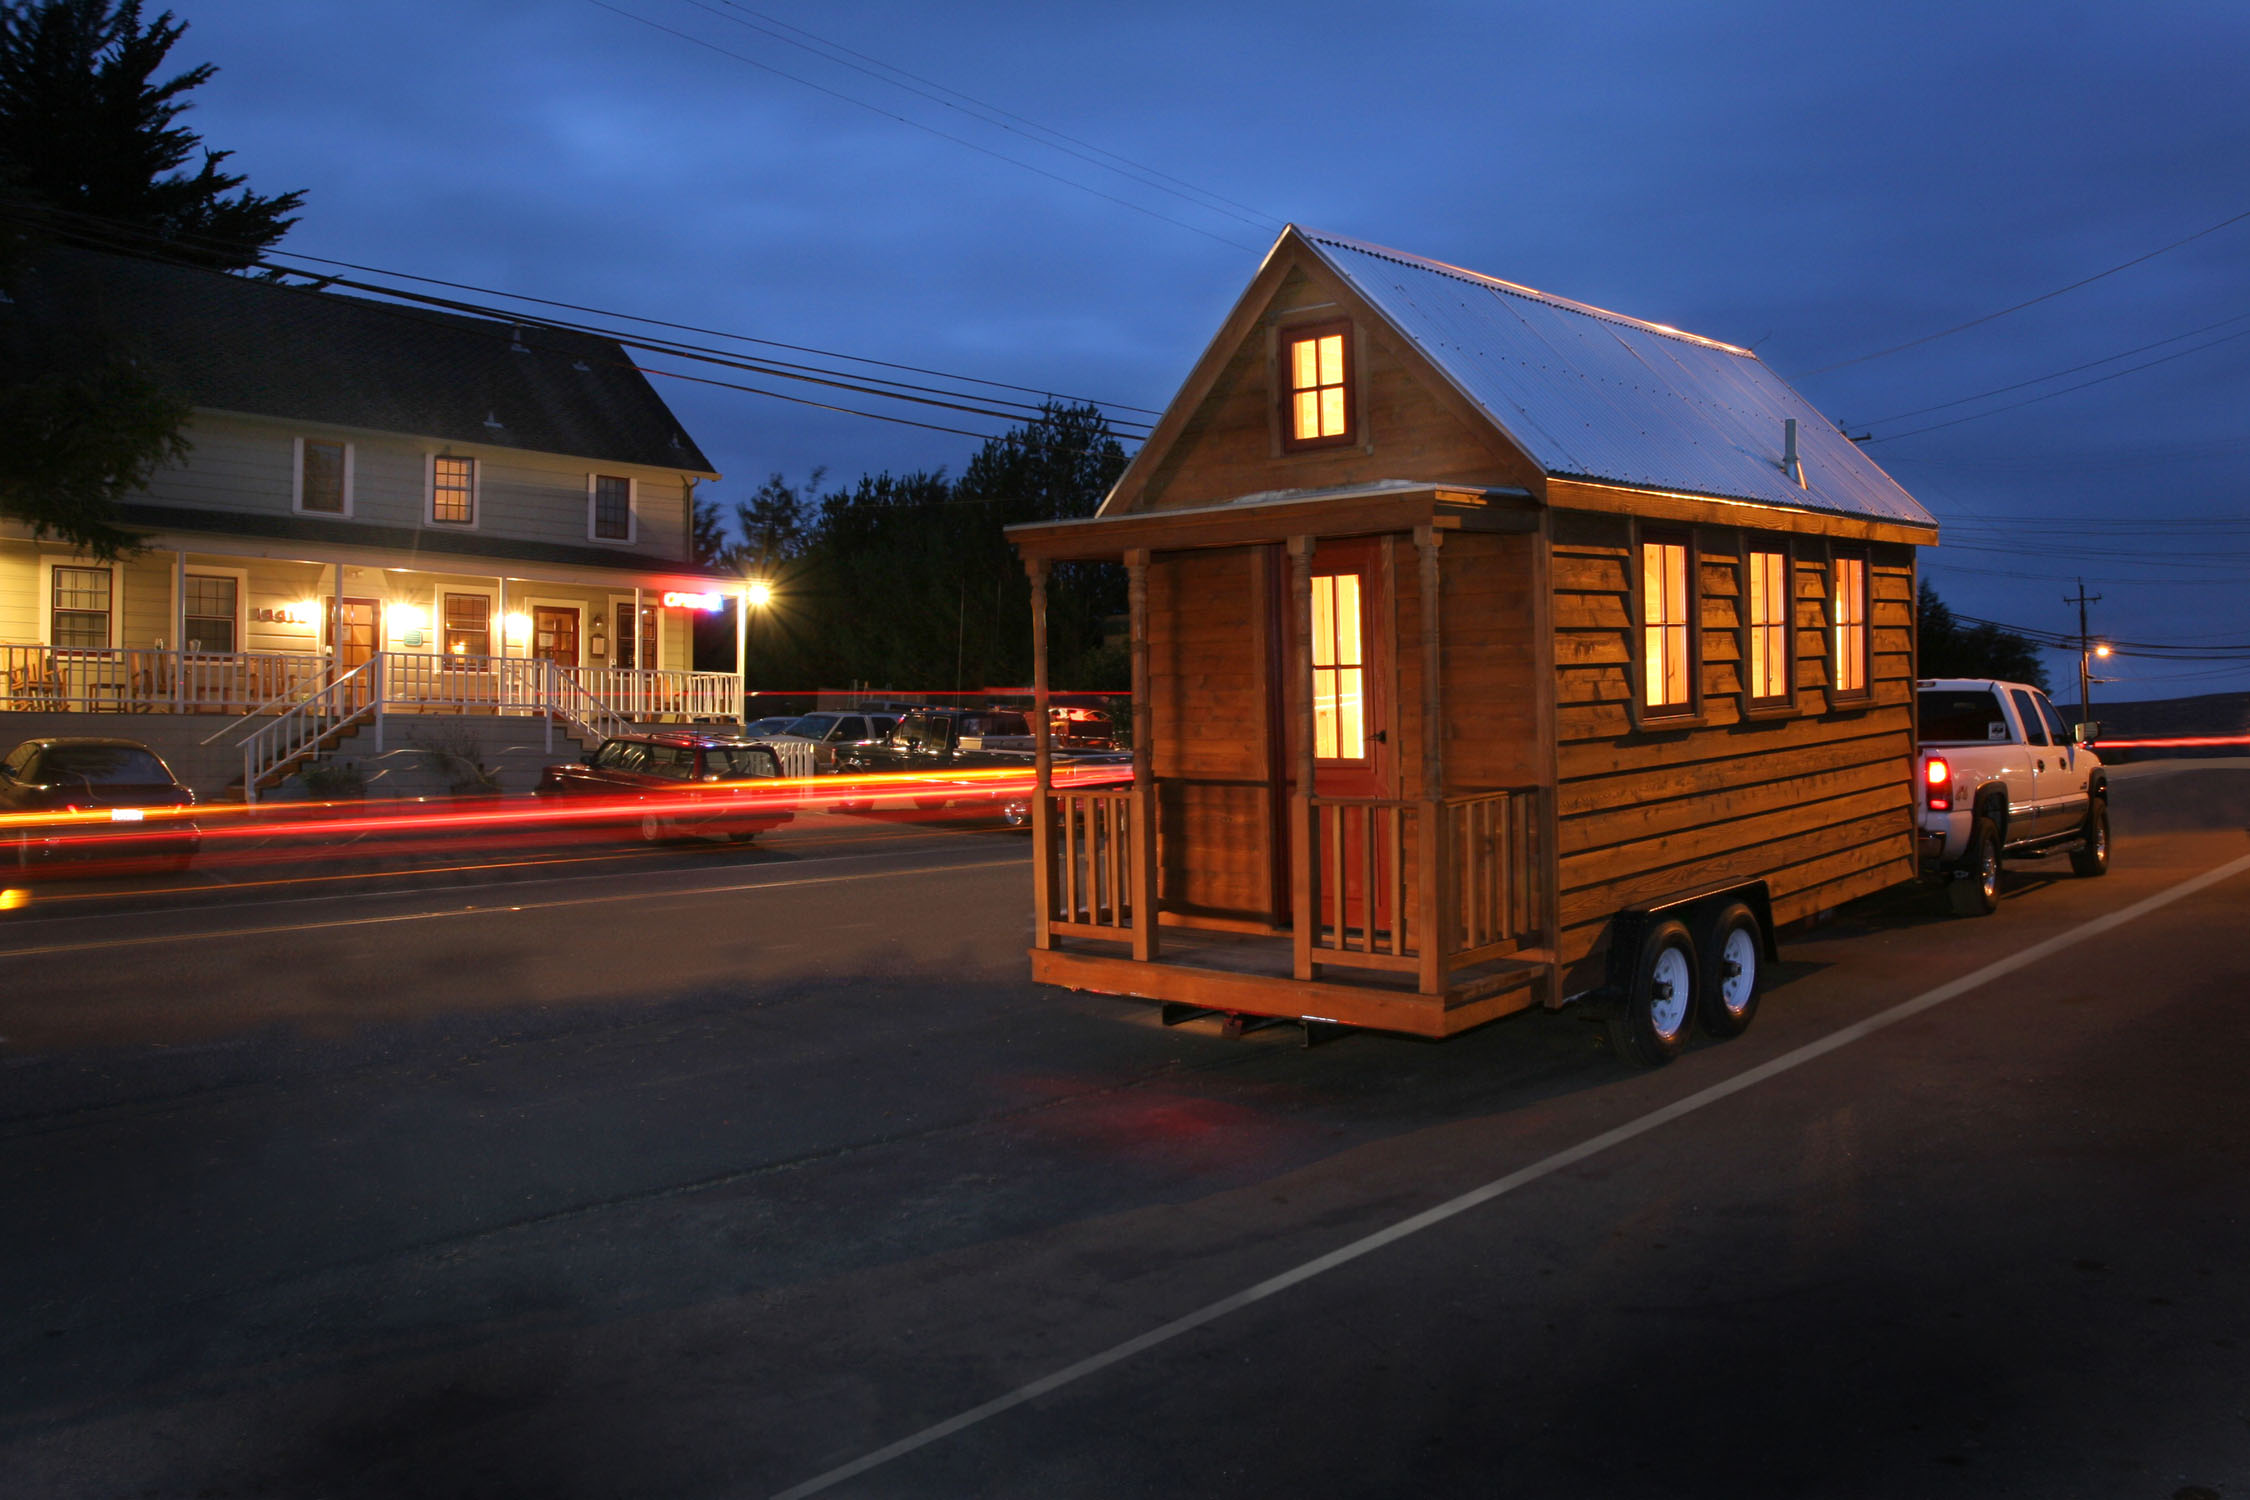 Winterize Your Tiny House